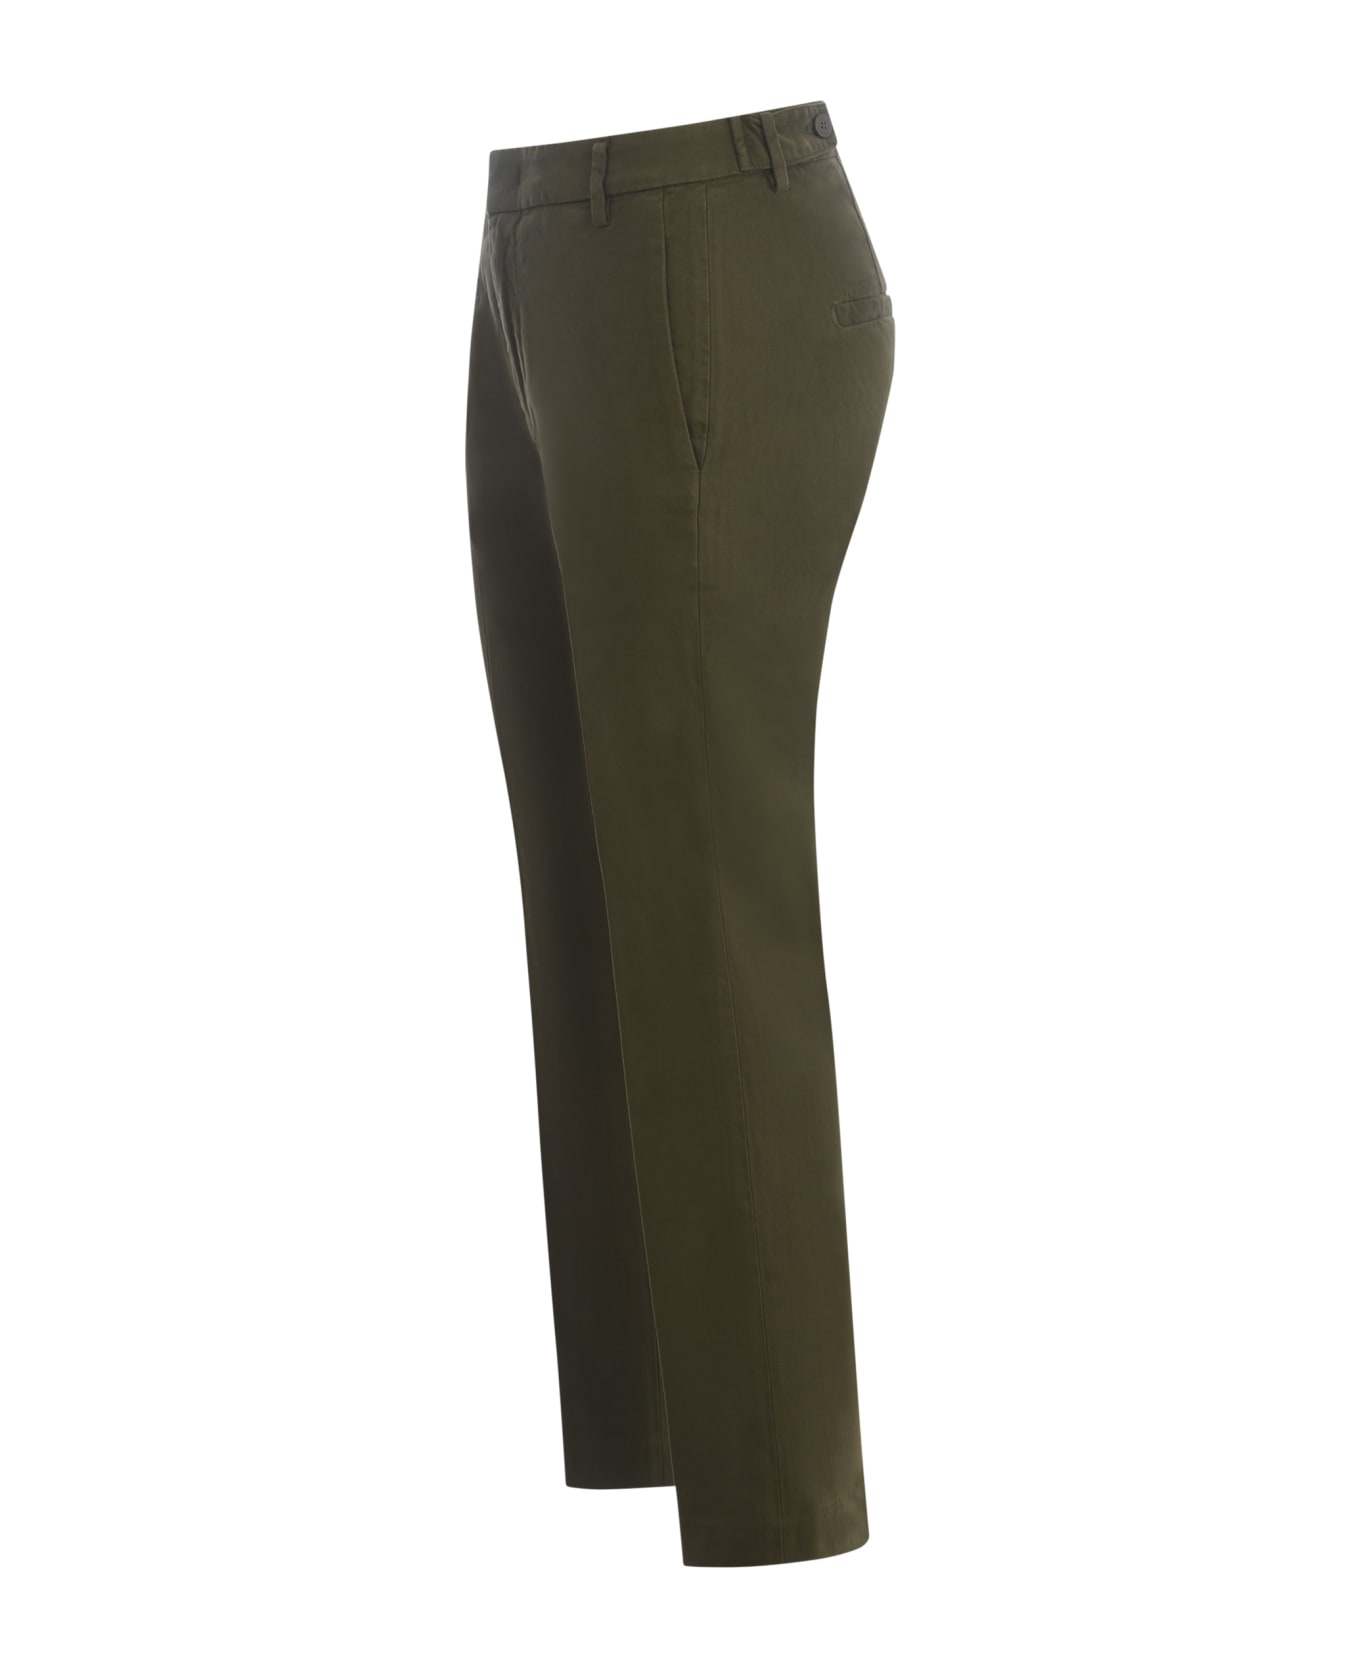 Dondup Trousers "ariel 27 Inches" In Stretch Cotton - Verde militare ボトムス